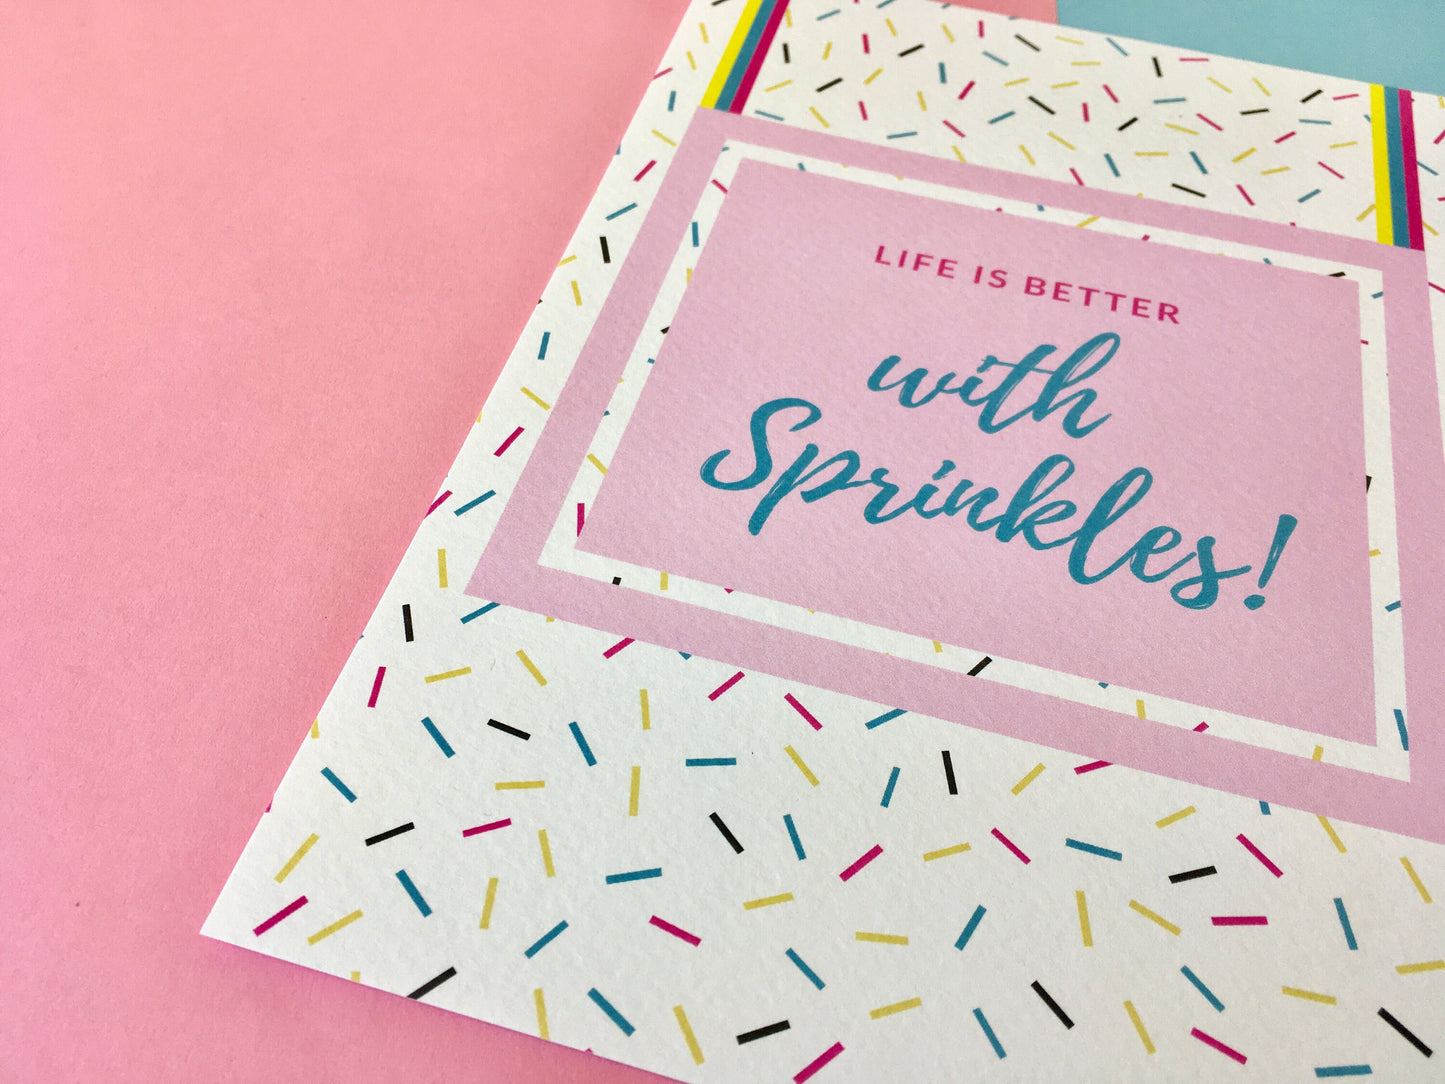 Life is Better with Sprinkles Print, Kitchen Decor